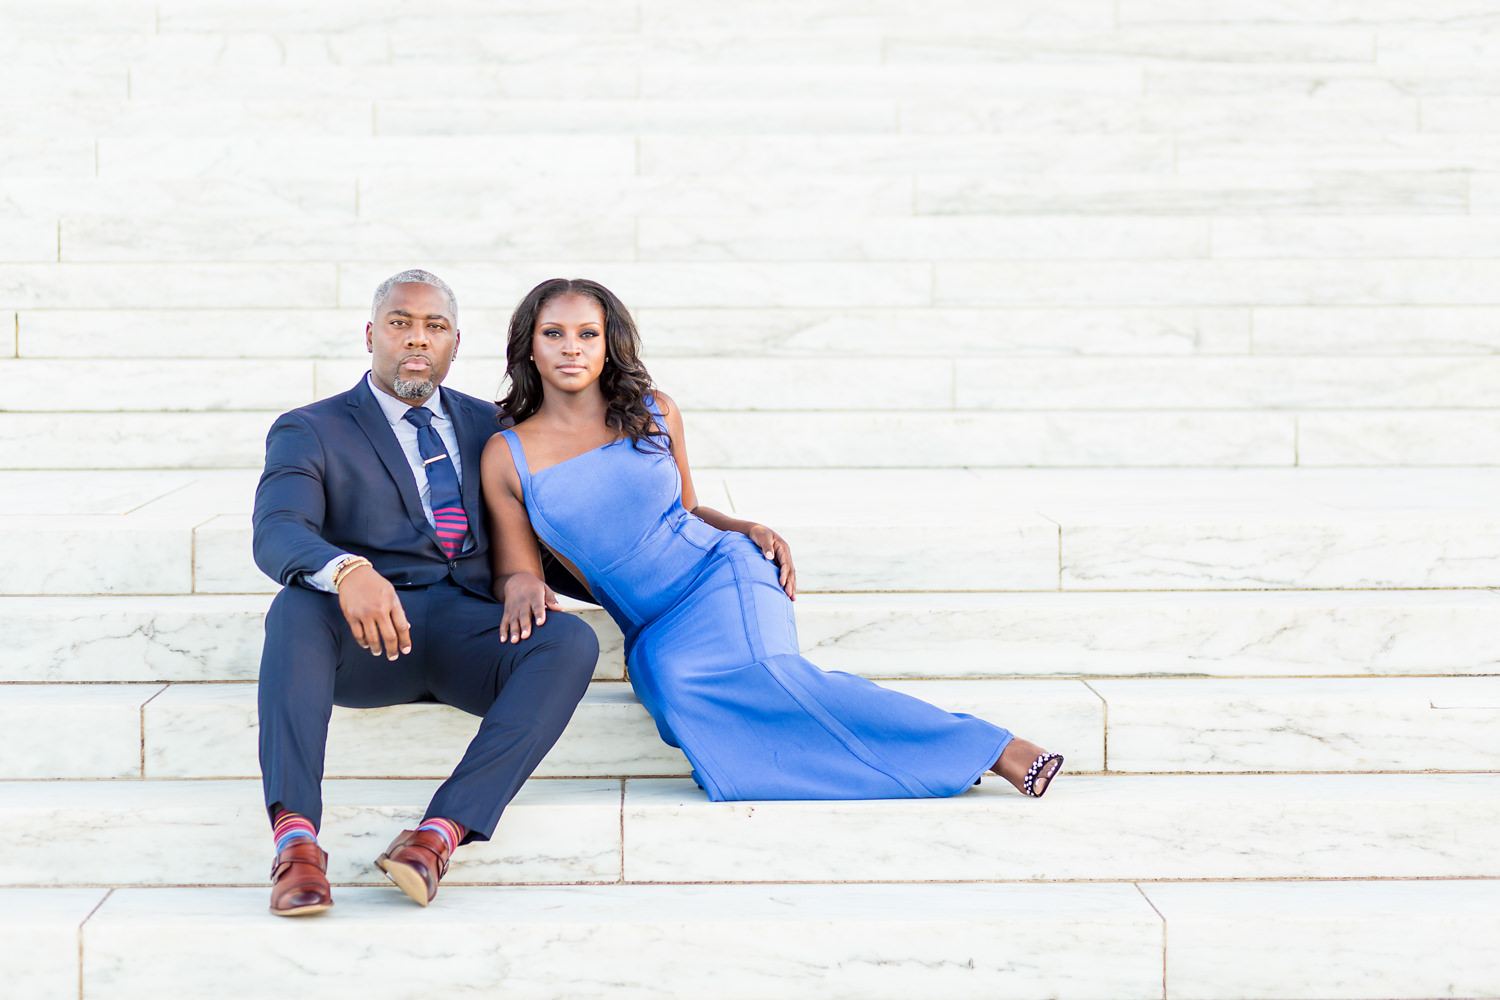 This photo was taken on the steps of the Jefferson memorial in Washington DC, Our goal is to create modern fine art portraits, This black couple is editorially posed, The guy is sitting and the gal is lounging with her long periwinkle dress, Her arm is on his leg and they look like a perfect pair, Procopio Photography, best top Washington DC photographer, best top Maryland photographer, best top Virginia photographer, best top DMV photographer, best top wedding photographer, best top commercial photographer, best top portrait photographer, best top boudoir photographer, modern fine art portraits, dramatic, unique, different, bold, editorial, photojournalism, award winning photographer, published photographer, memorable images, be different, stand out, engagement photography